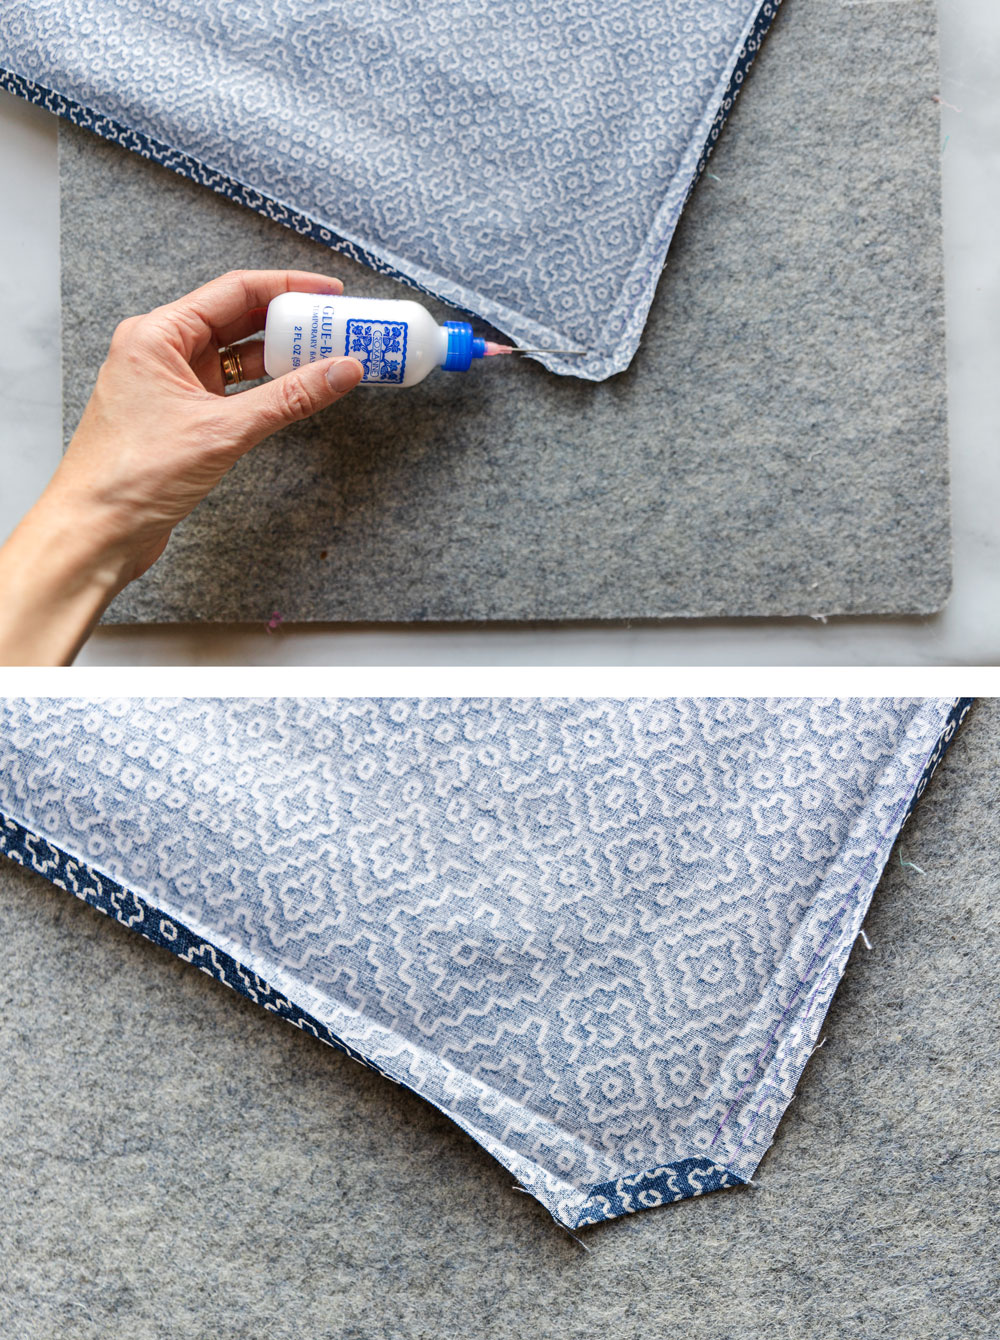 Learn how to sew a napkin in this beginner-friendly DIY cloth napkins tutorial. This fat quarter friendly sewing tutorial is incredibly fast and easy! suzyquilts.com #napkinstutorial #sewingdiy